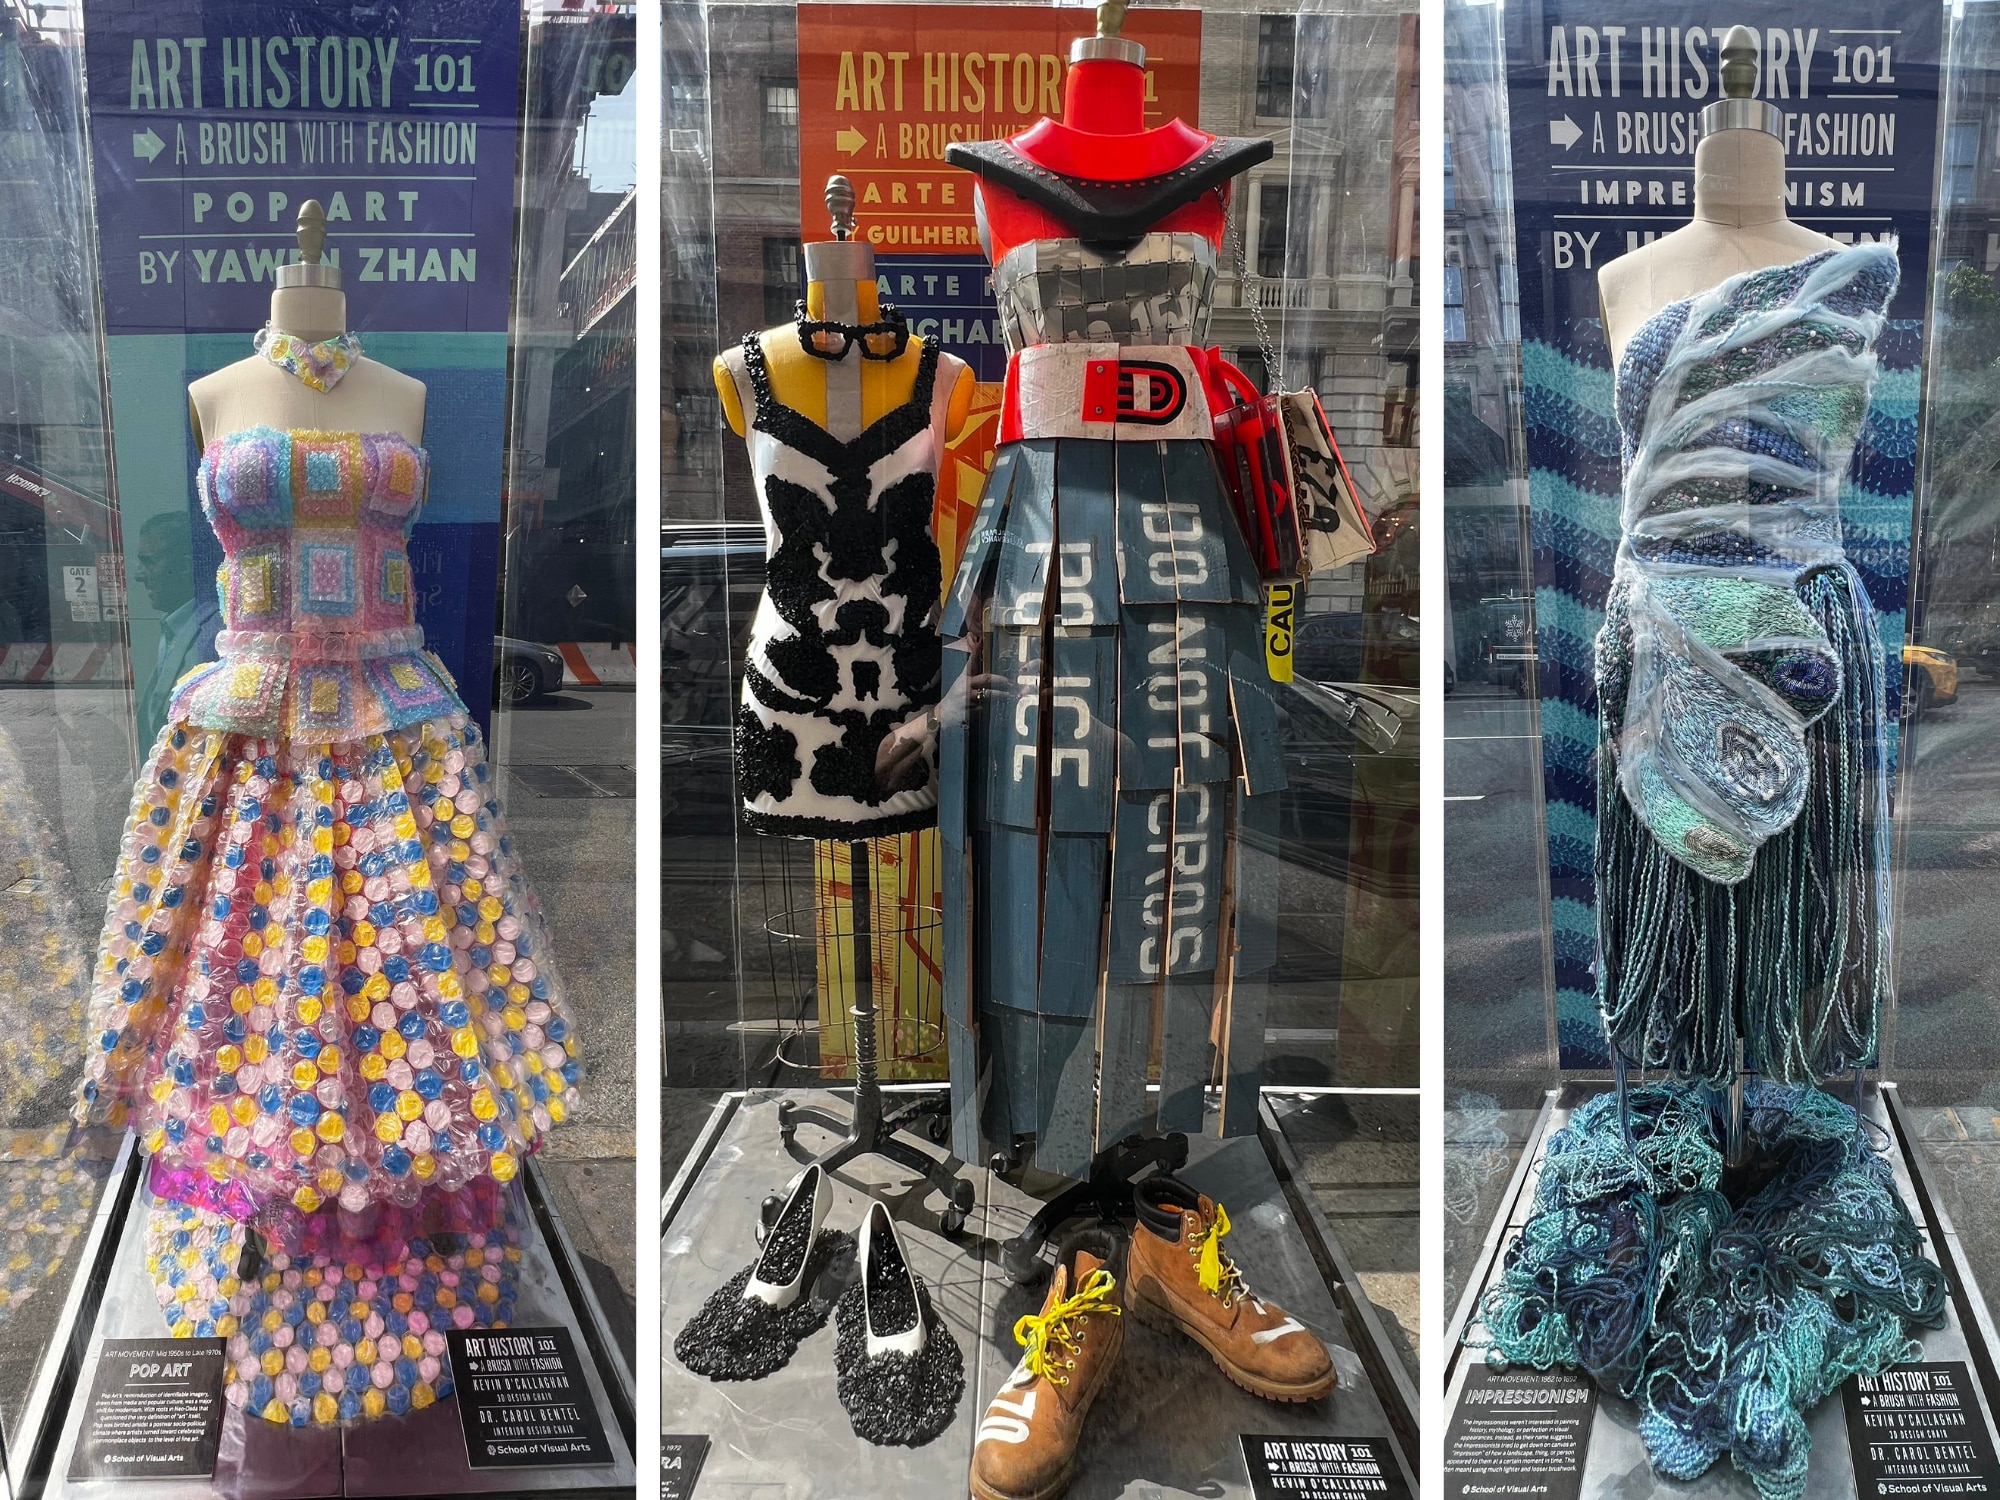 History collides with fashion for new Madison Avenue art installation